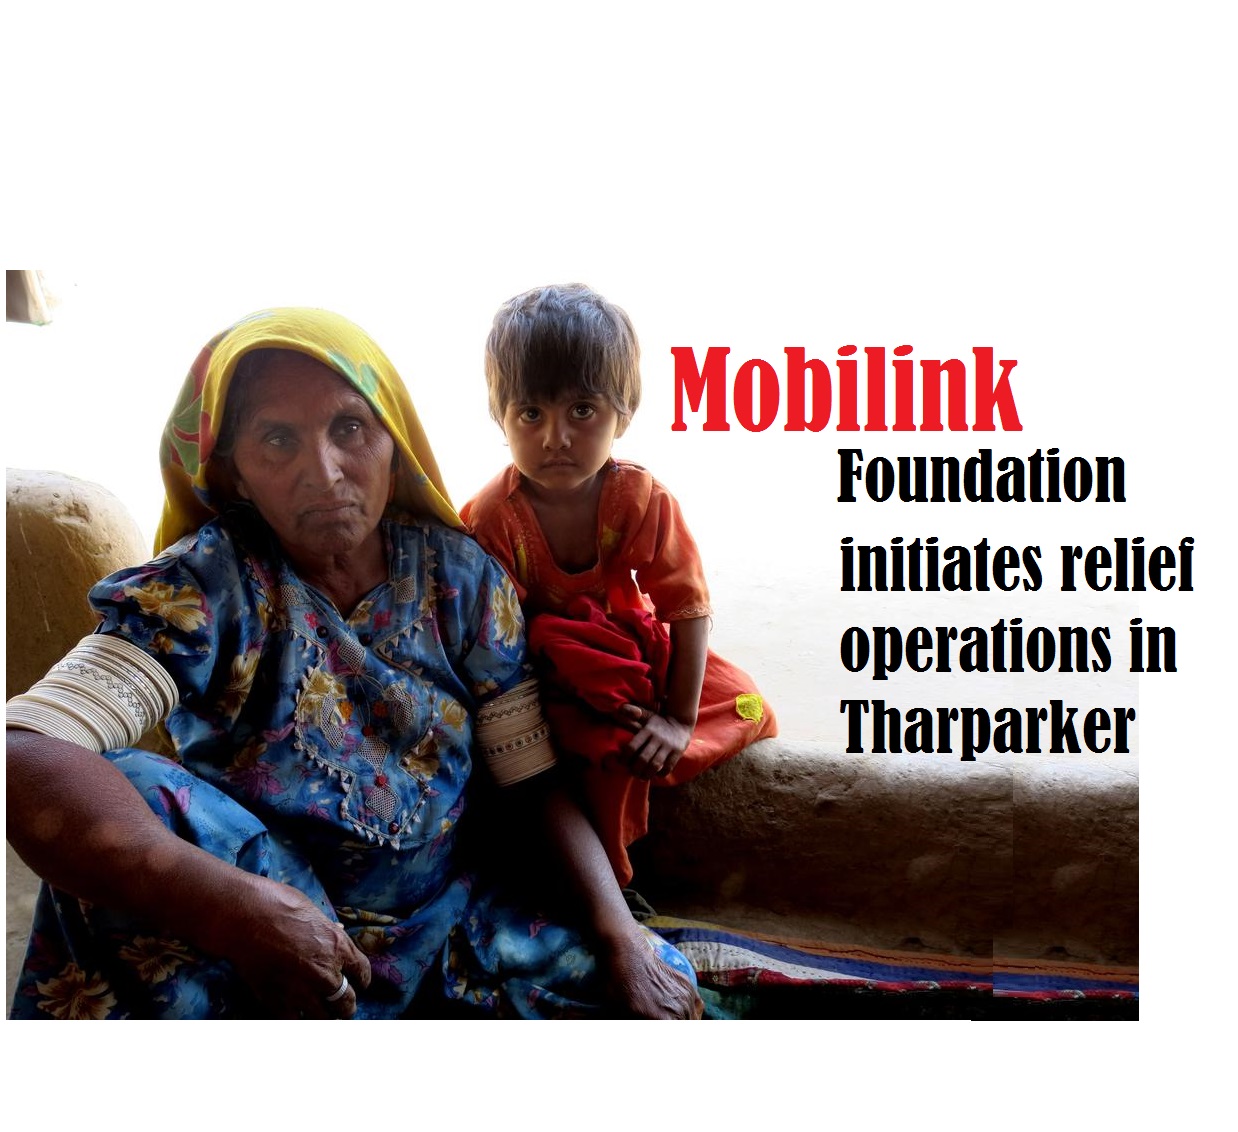 Mobilink Foundation initiates relief operations in Tharparker